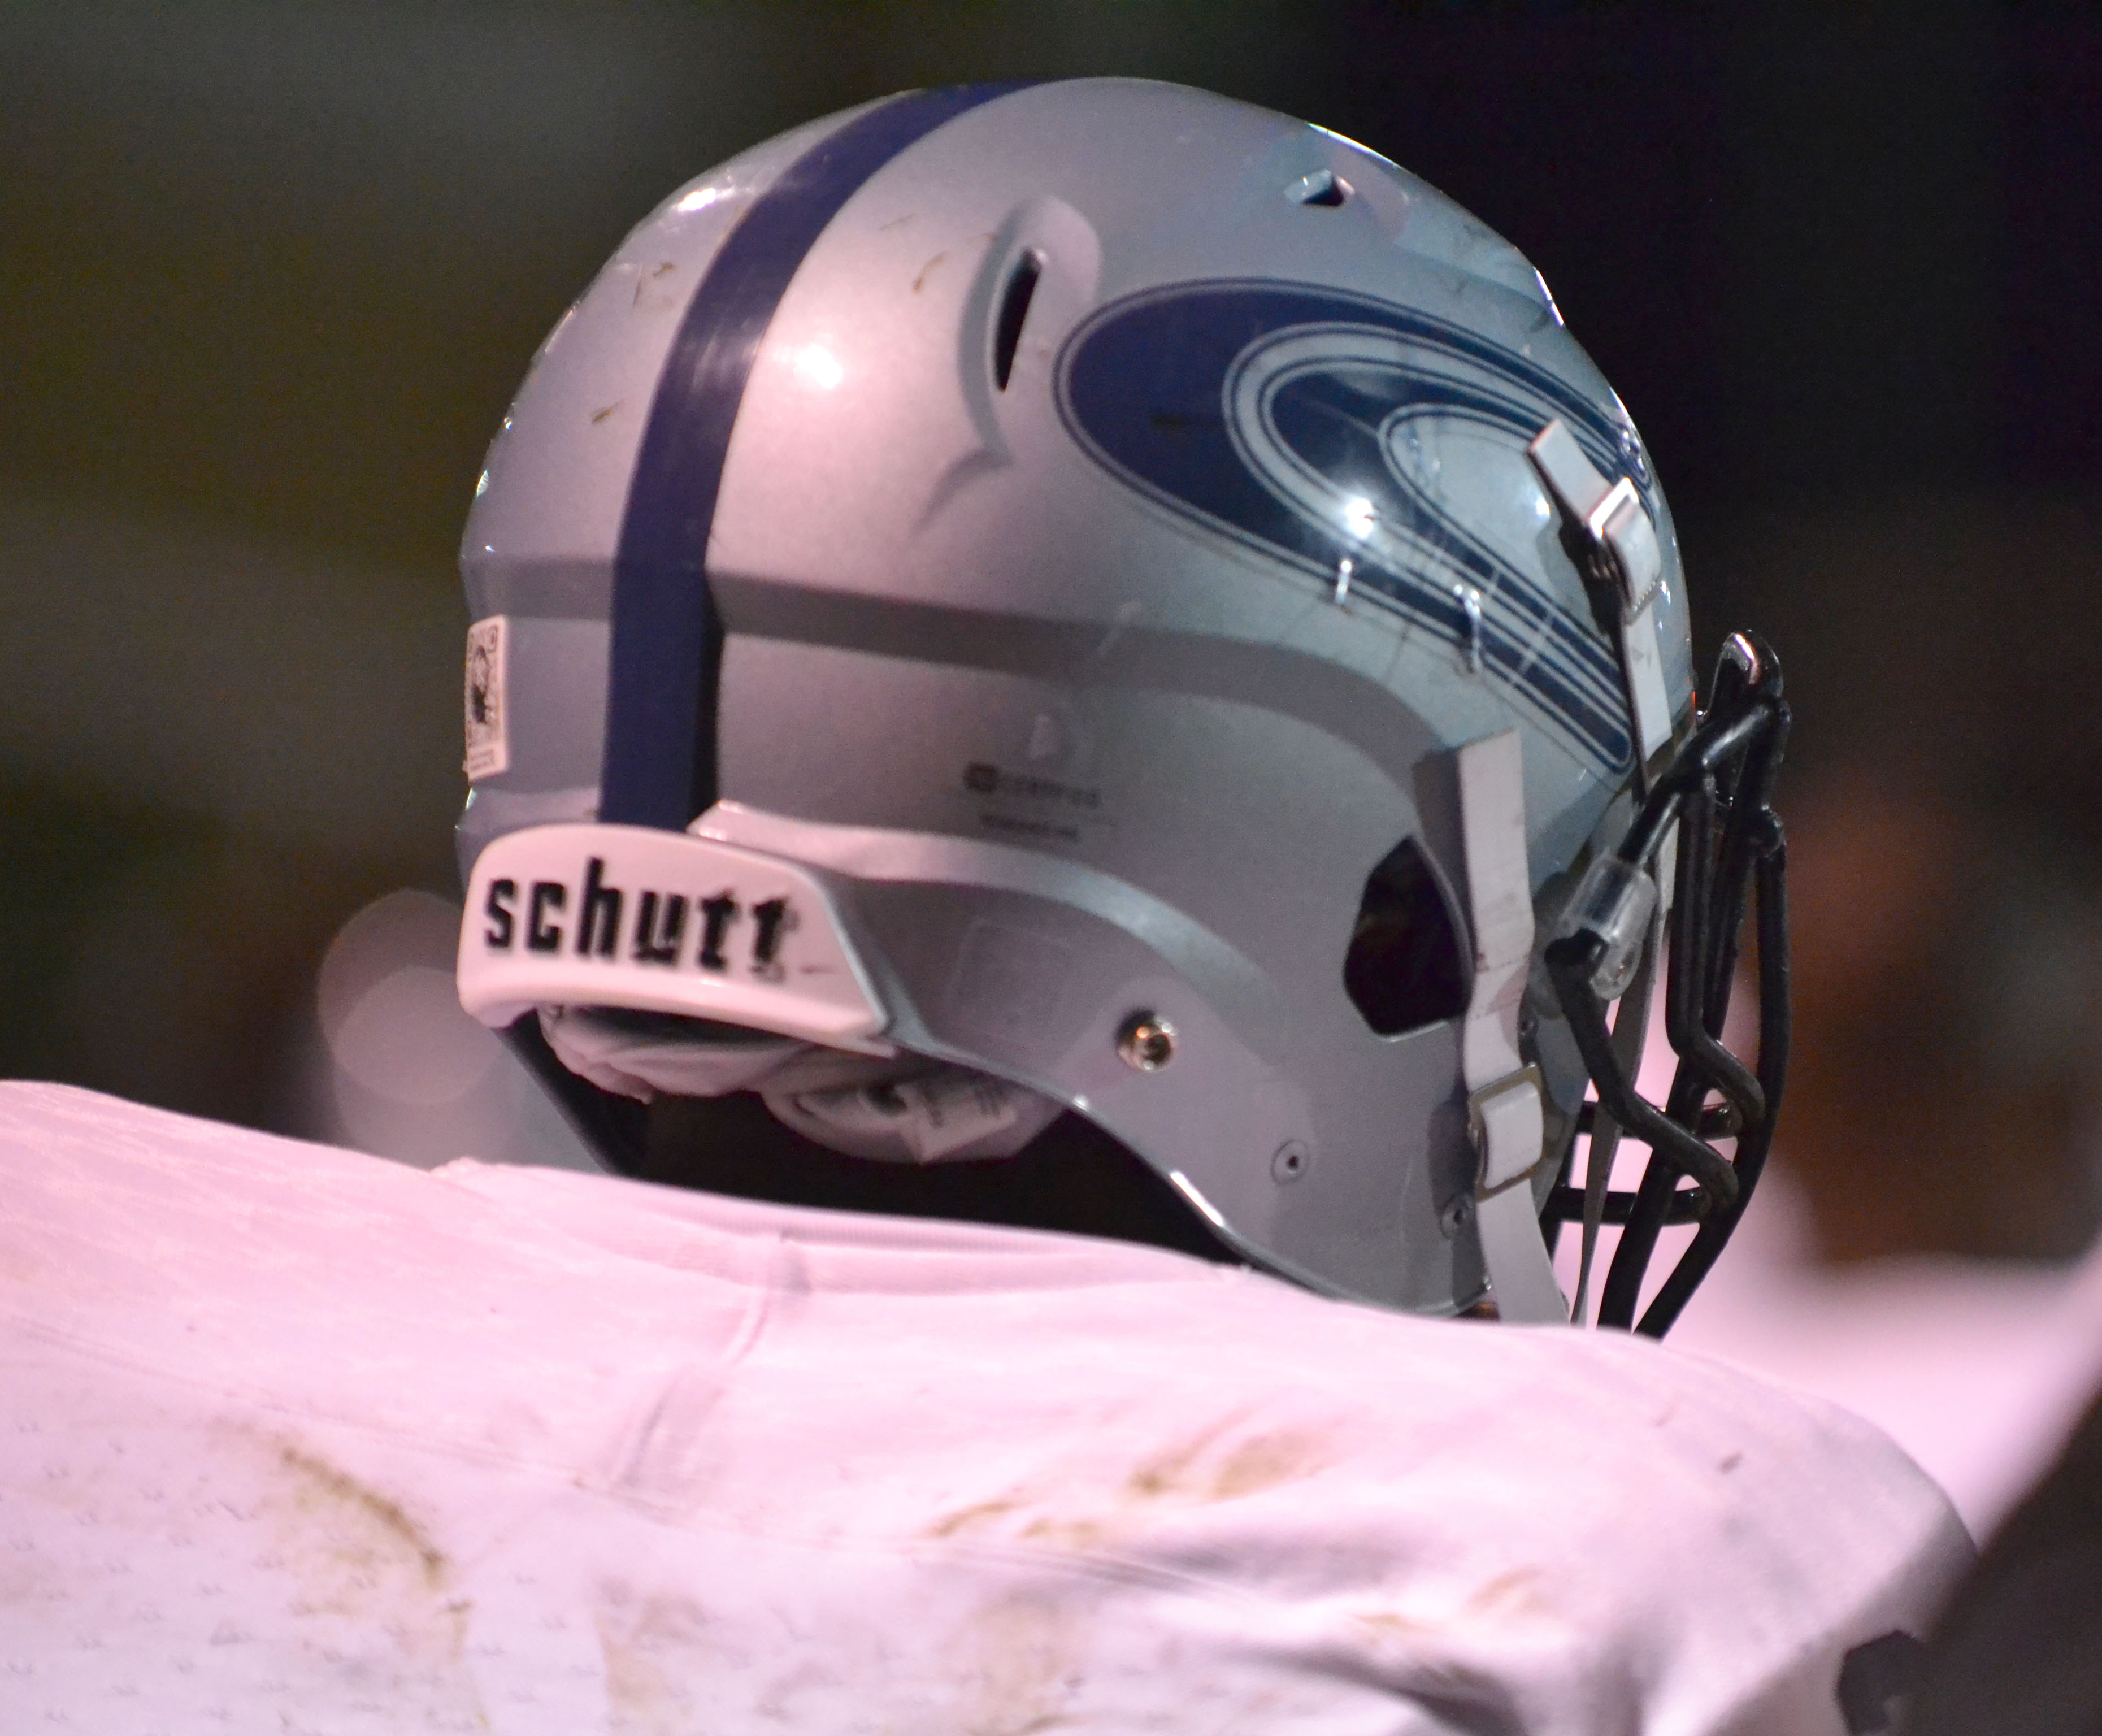 Clay-Chalkville crushes Homewood to advance to Round 3